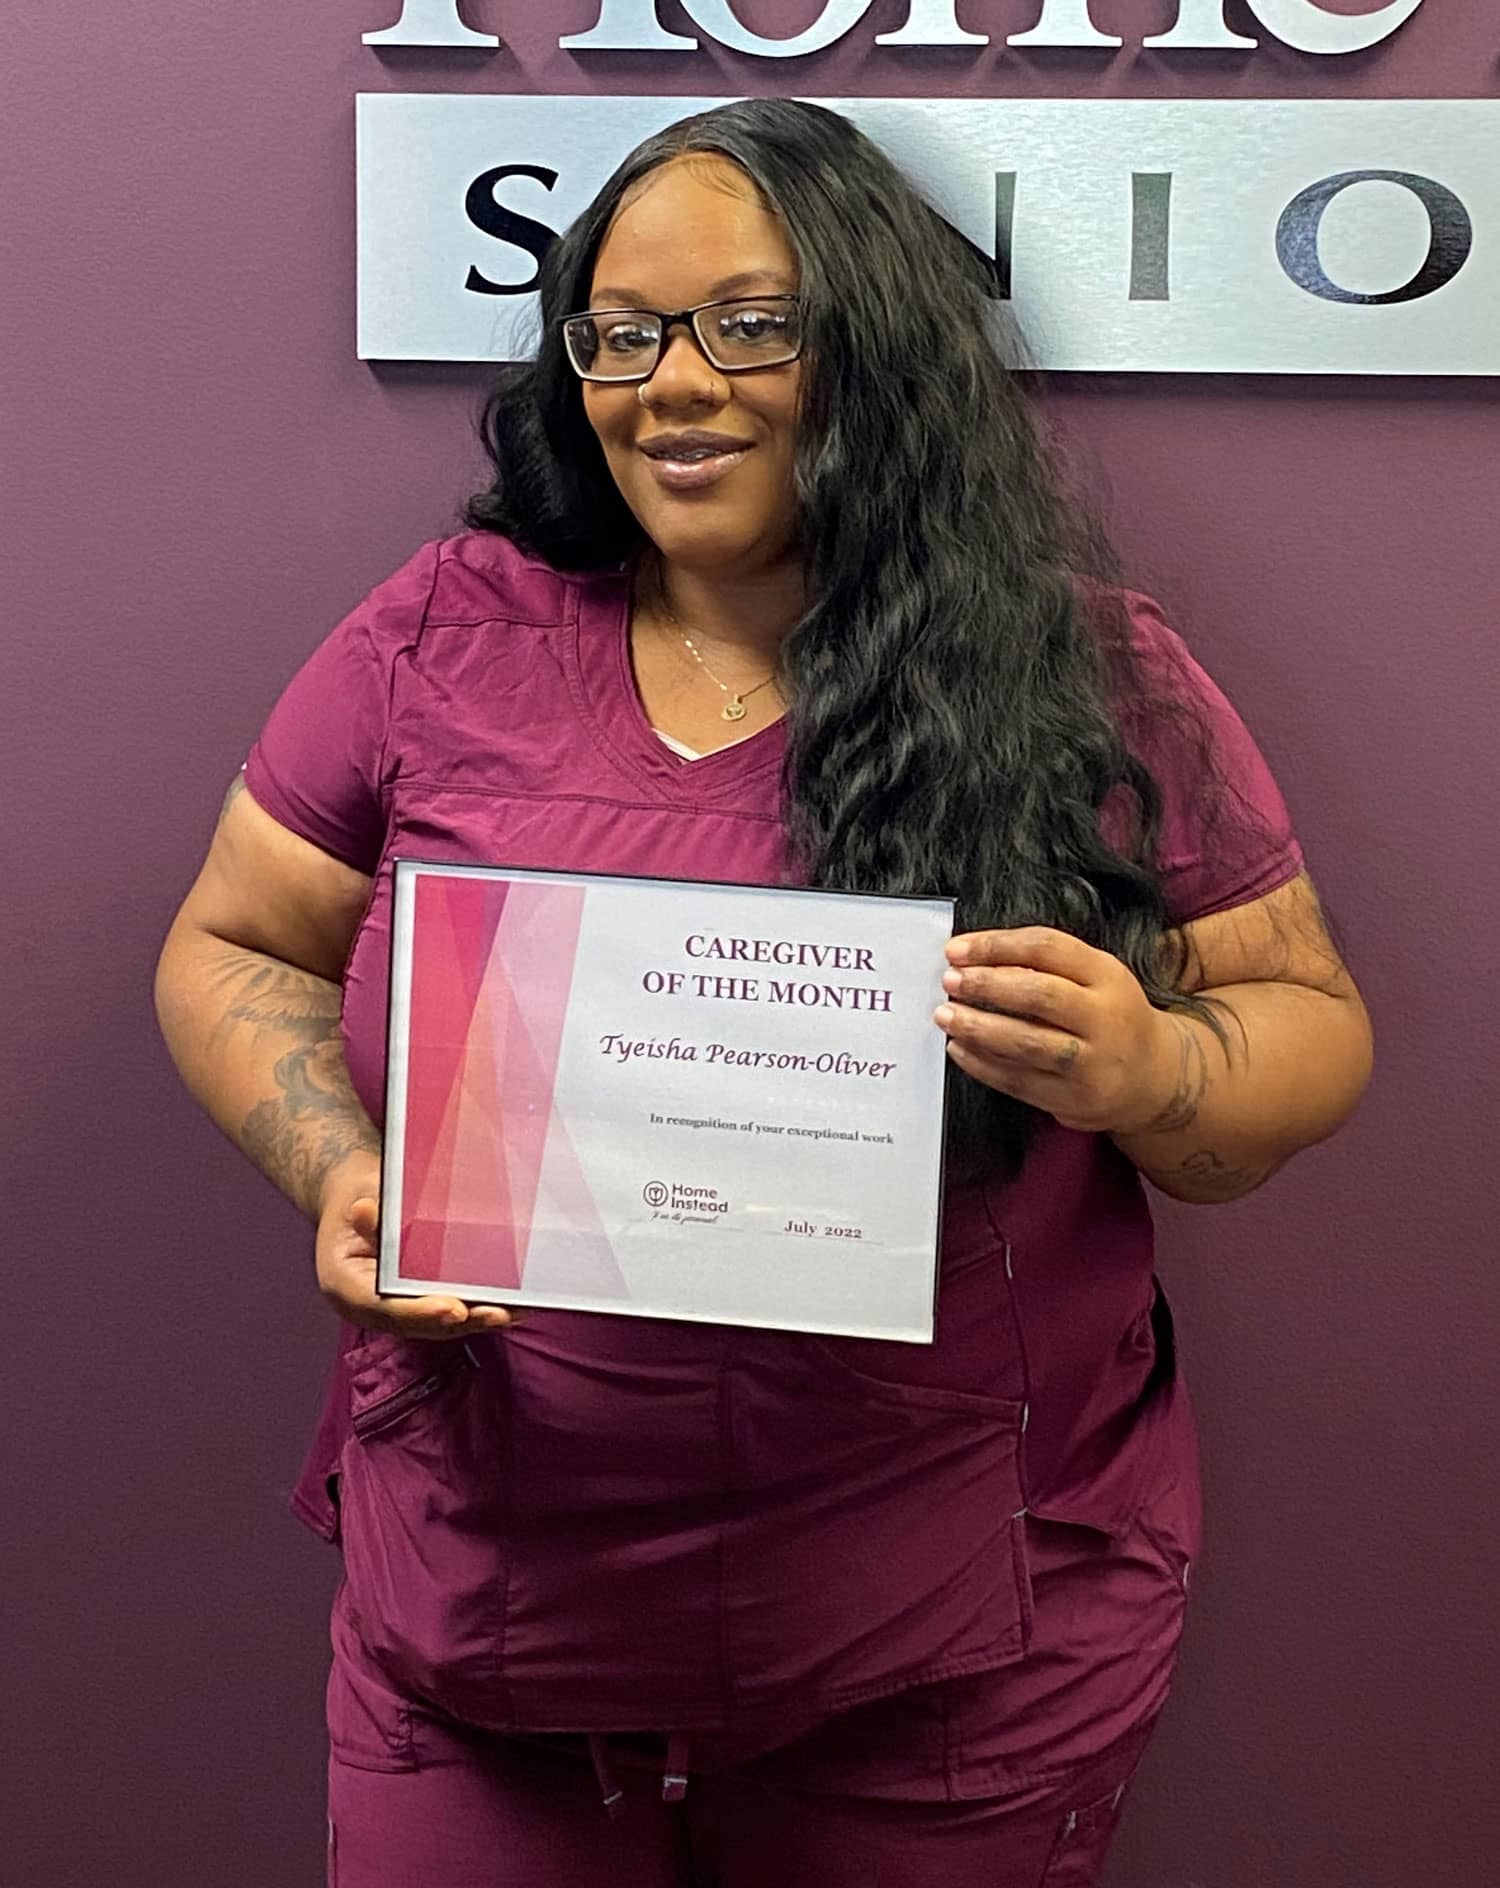 Tyeisha Pearson-Oliver July 2022 Care Professional of the Month